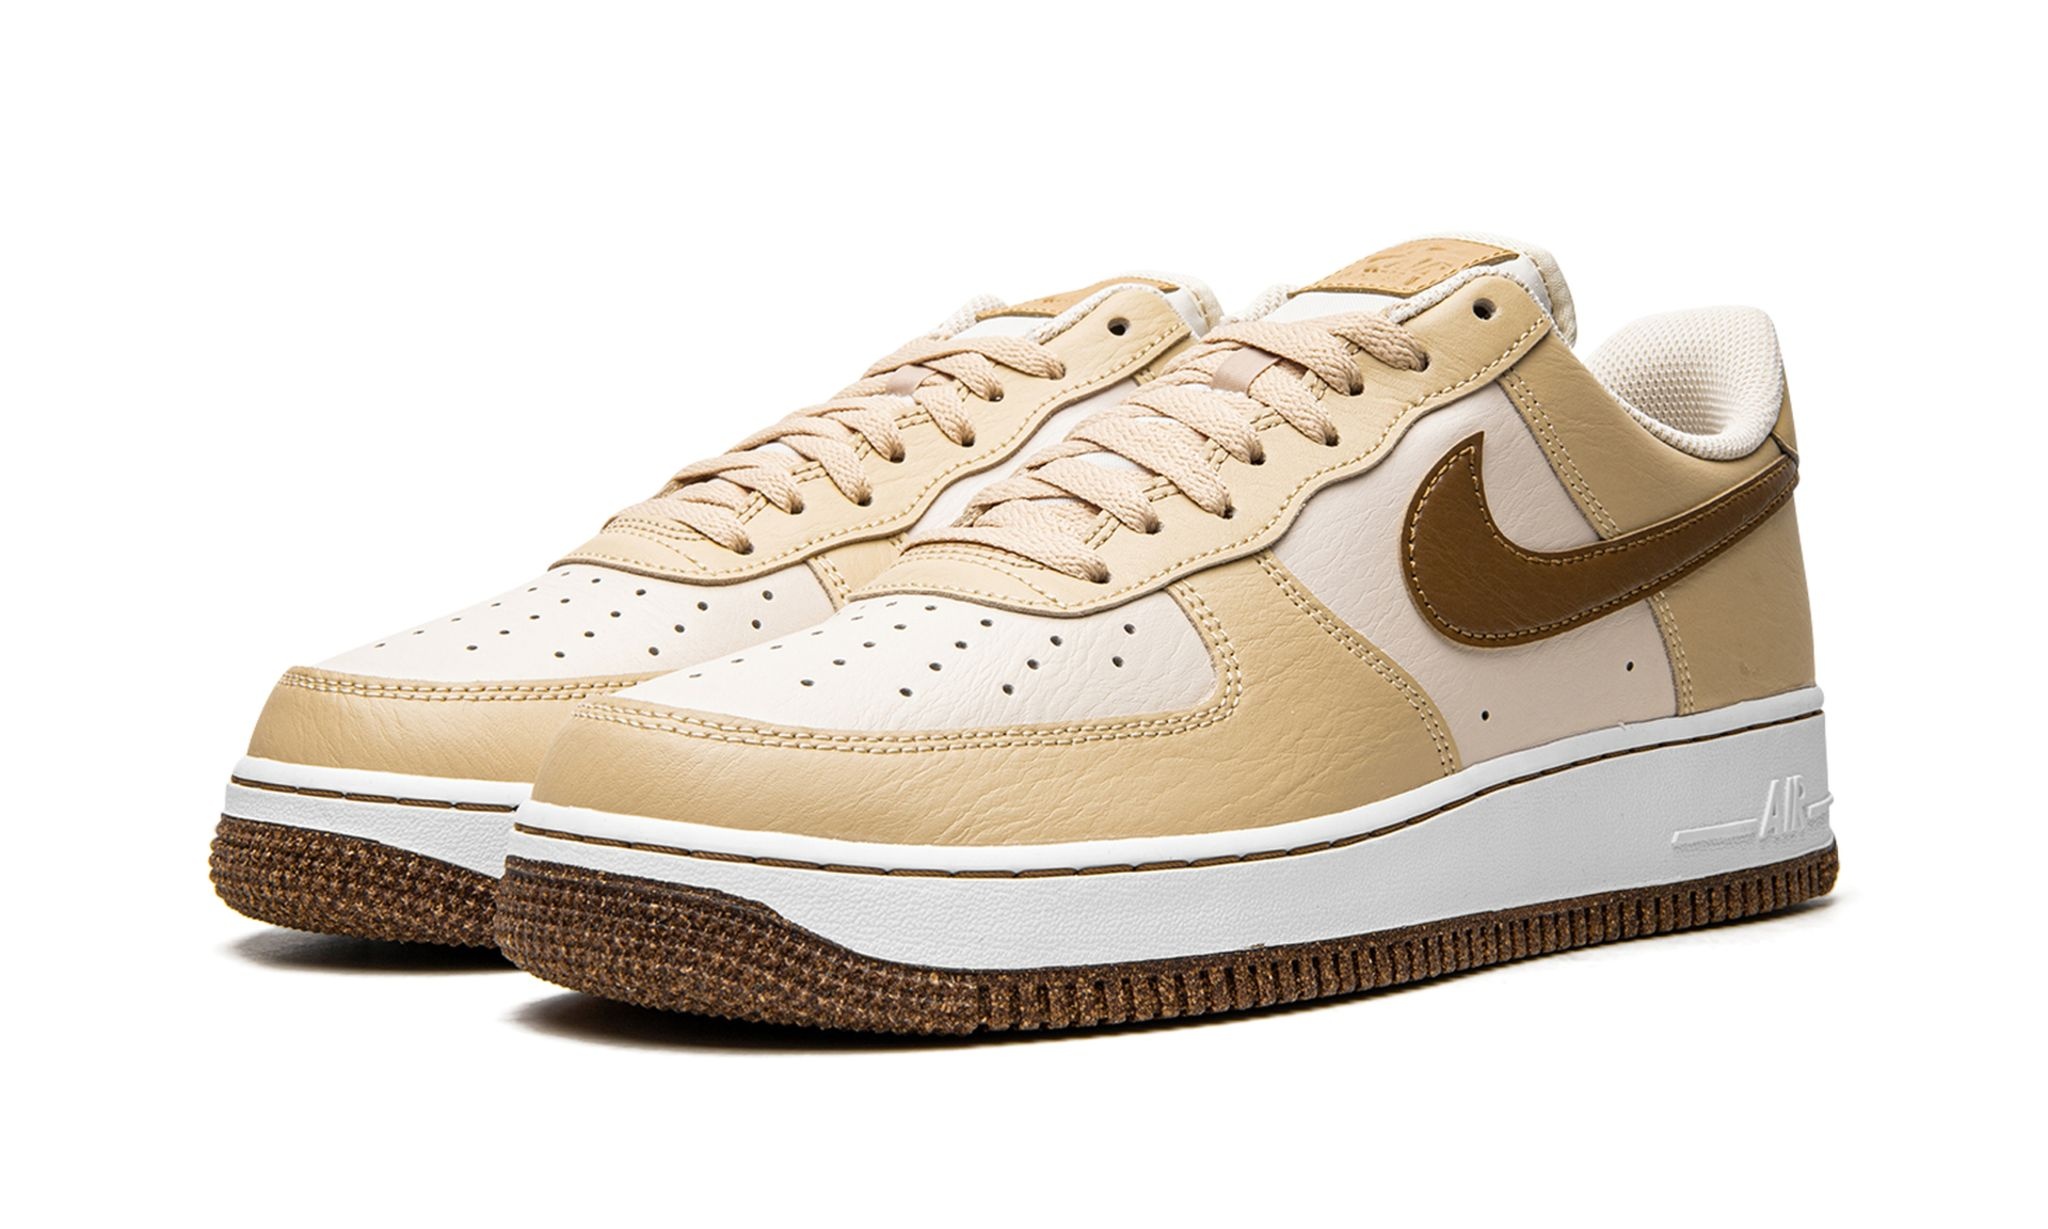 Air Force 1 Low '07 LV8 "Inspected by Swoosh" - 2